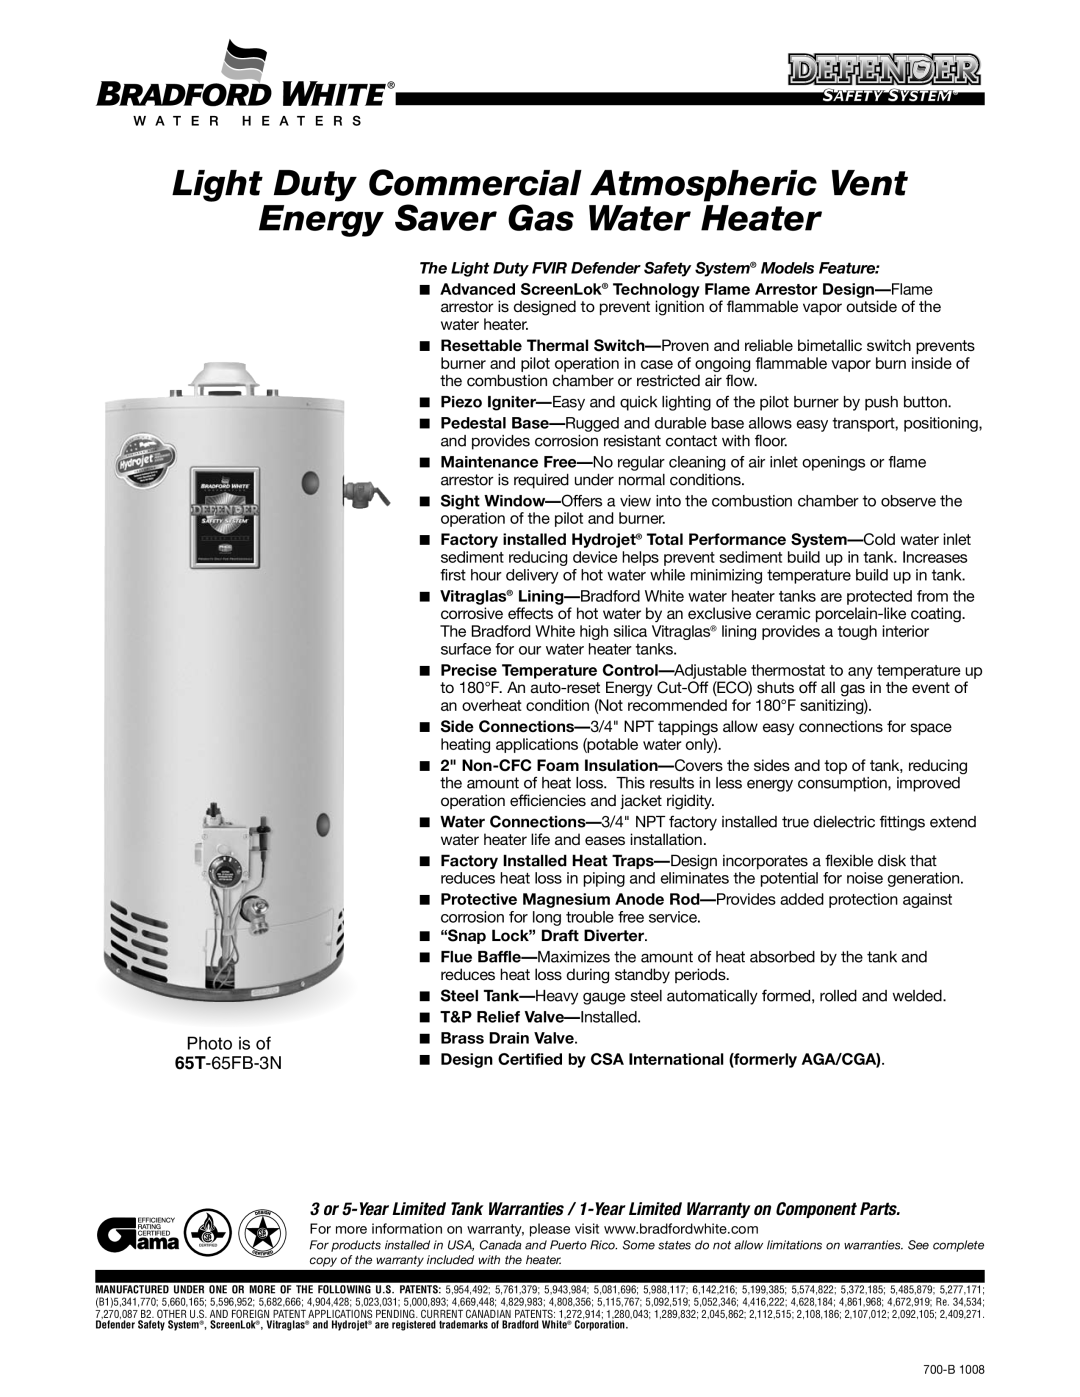 Bradford-White Corp 65T-65FB-3N warranty Light Duty Commercial Atmospheric Vent Energy Saver Gas Water Heater 